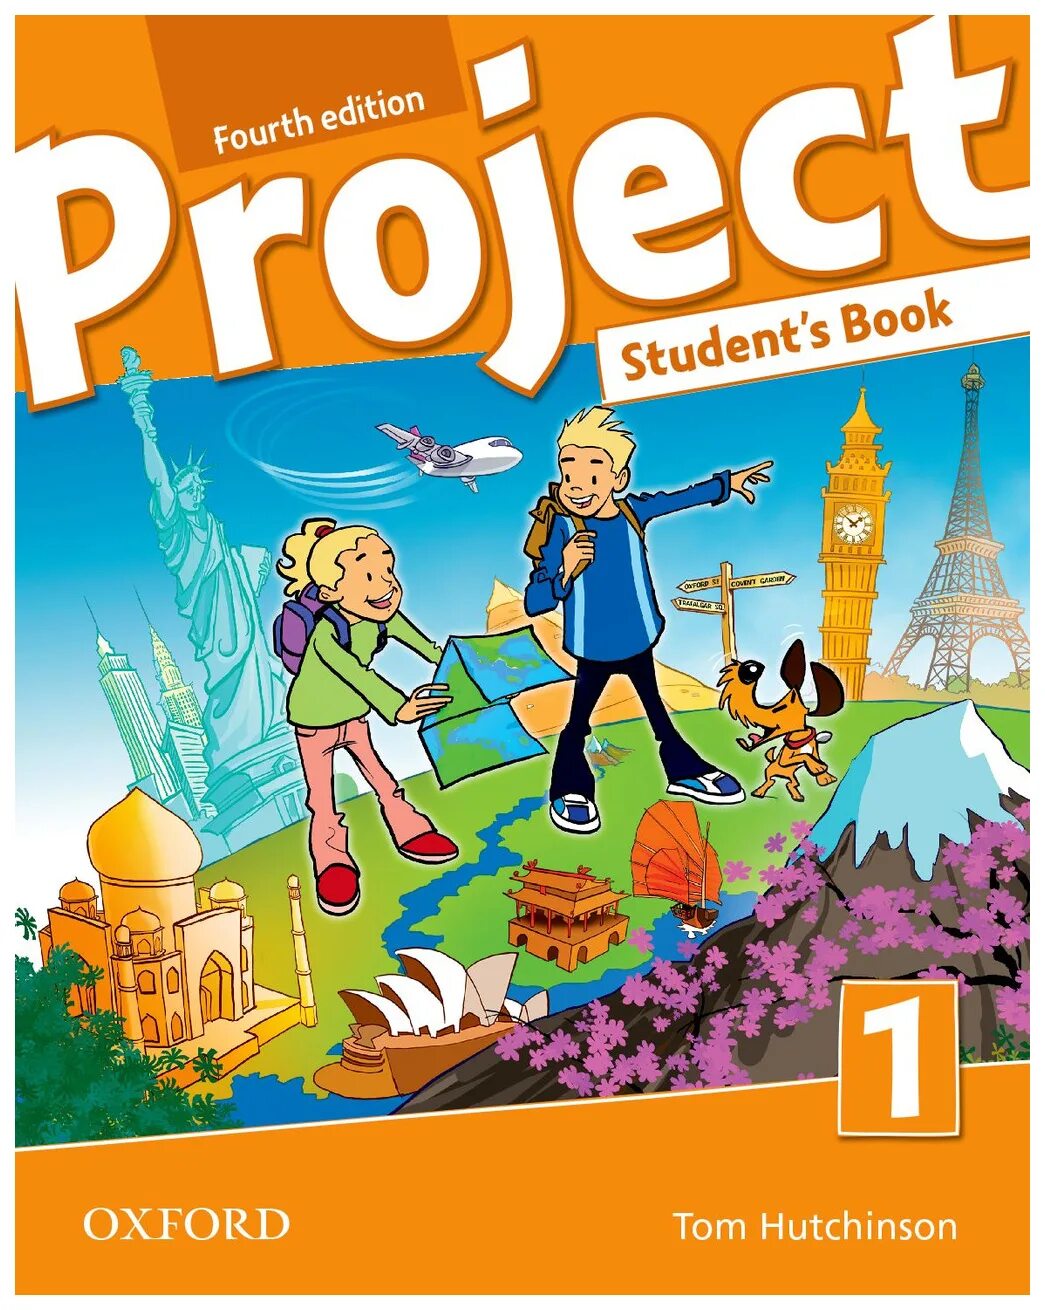 Project 1 fourth Edition students book. Project 1 4th Edition. Project student book4 fourth Edition Workbook book. Рабочая тетрадь Project 1 Oxford Tom Hutchinson.